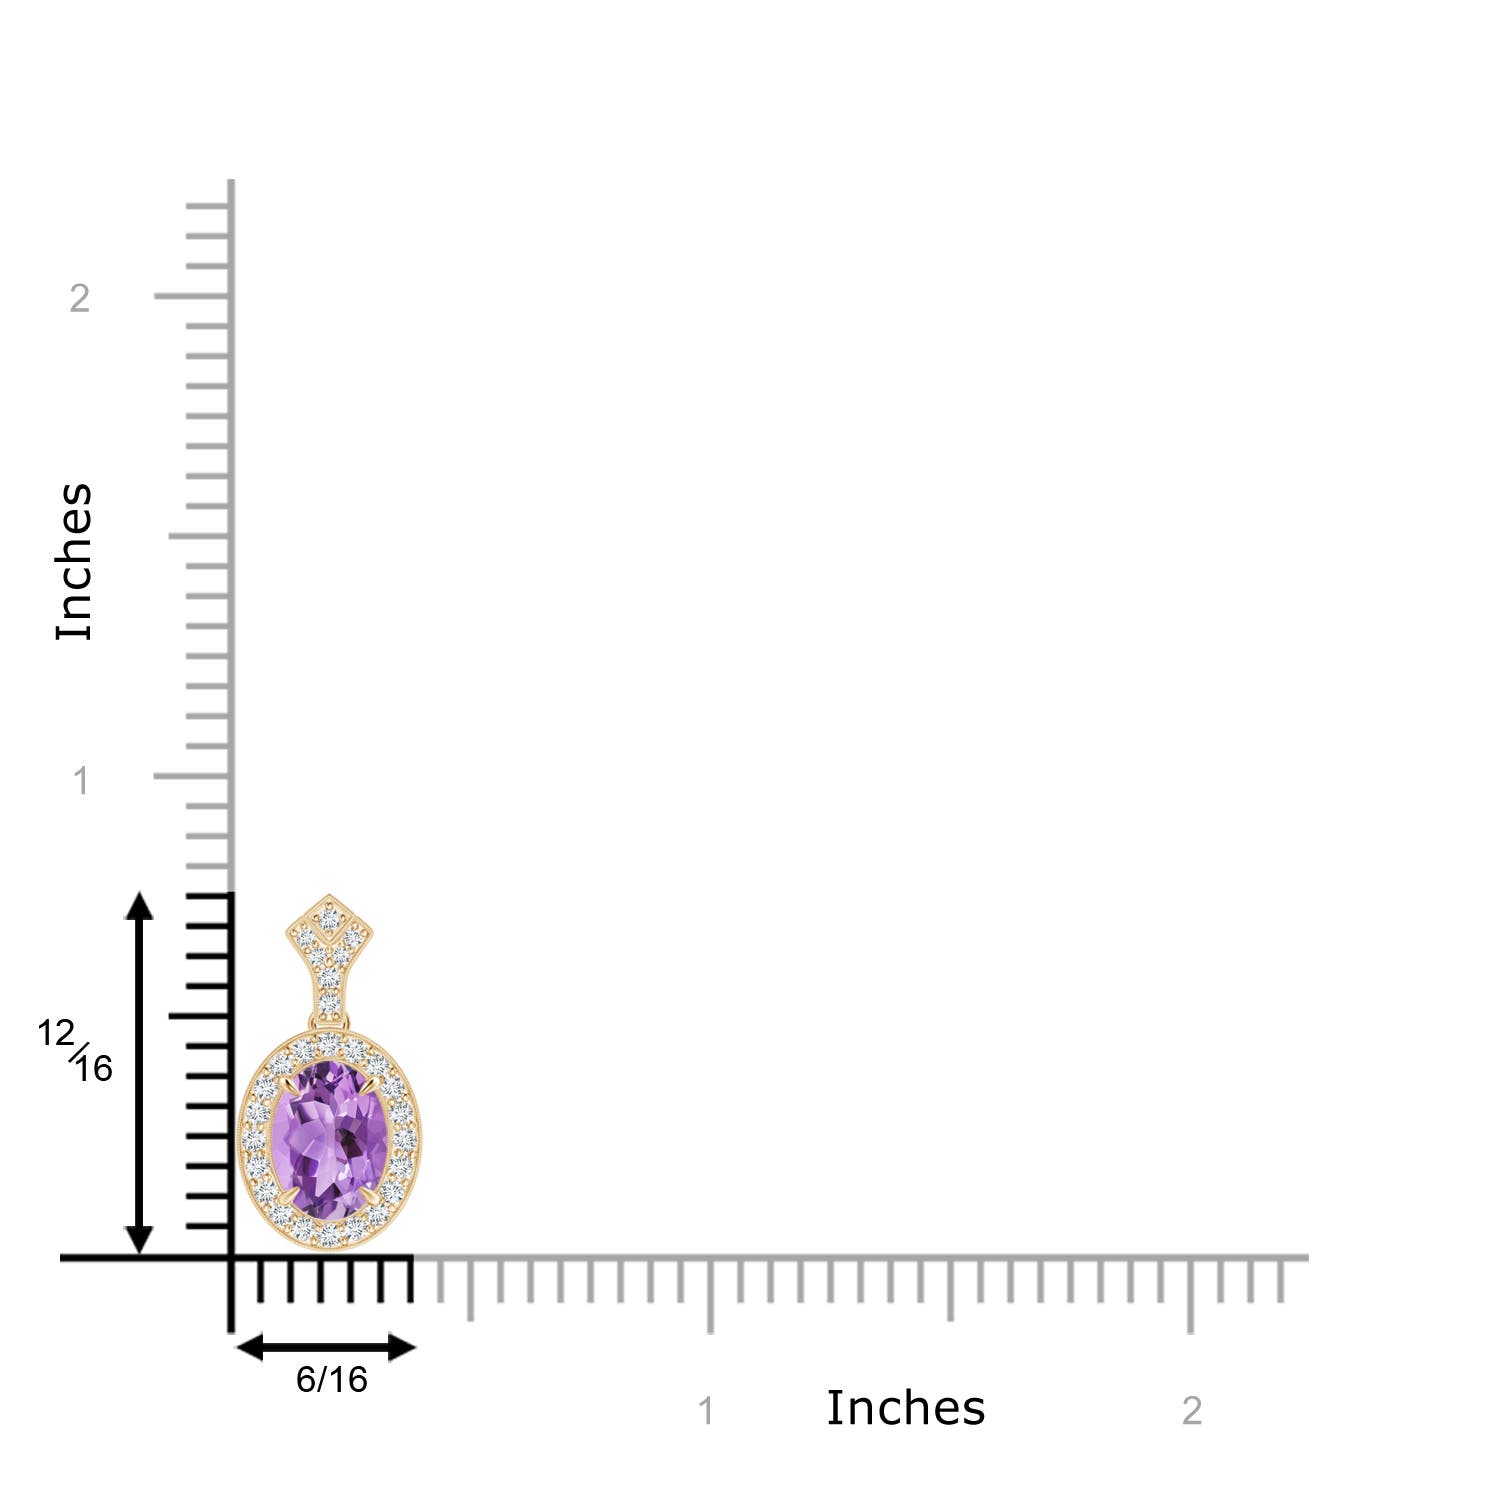 A - Amethyst / 1.79 CT / 14 KT Yellow Gold